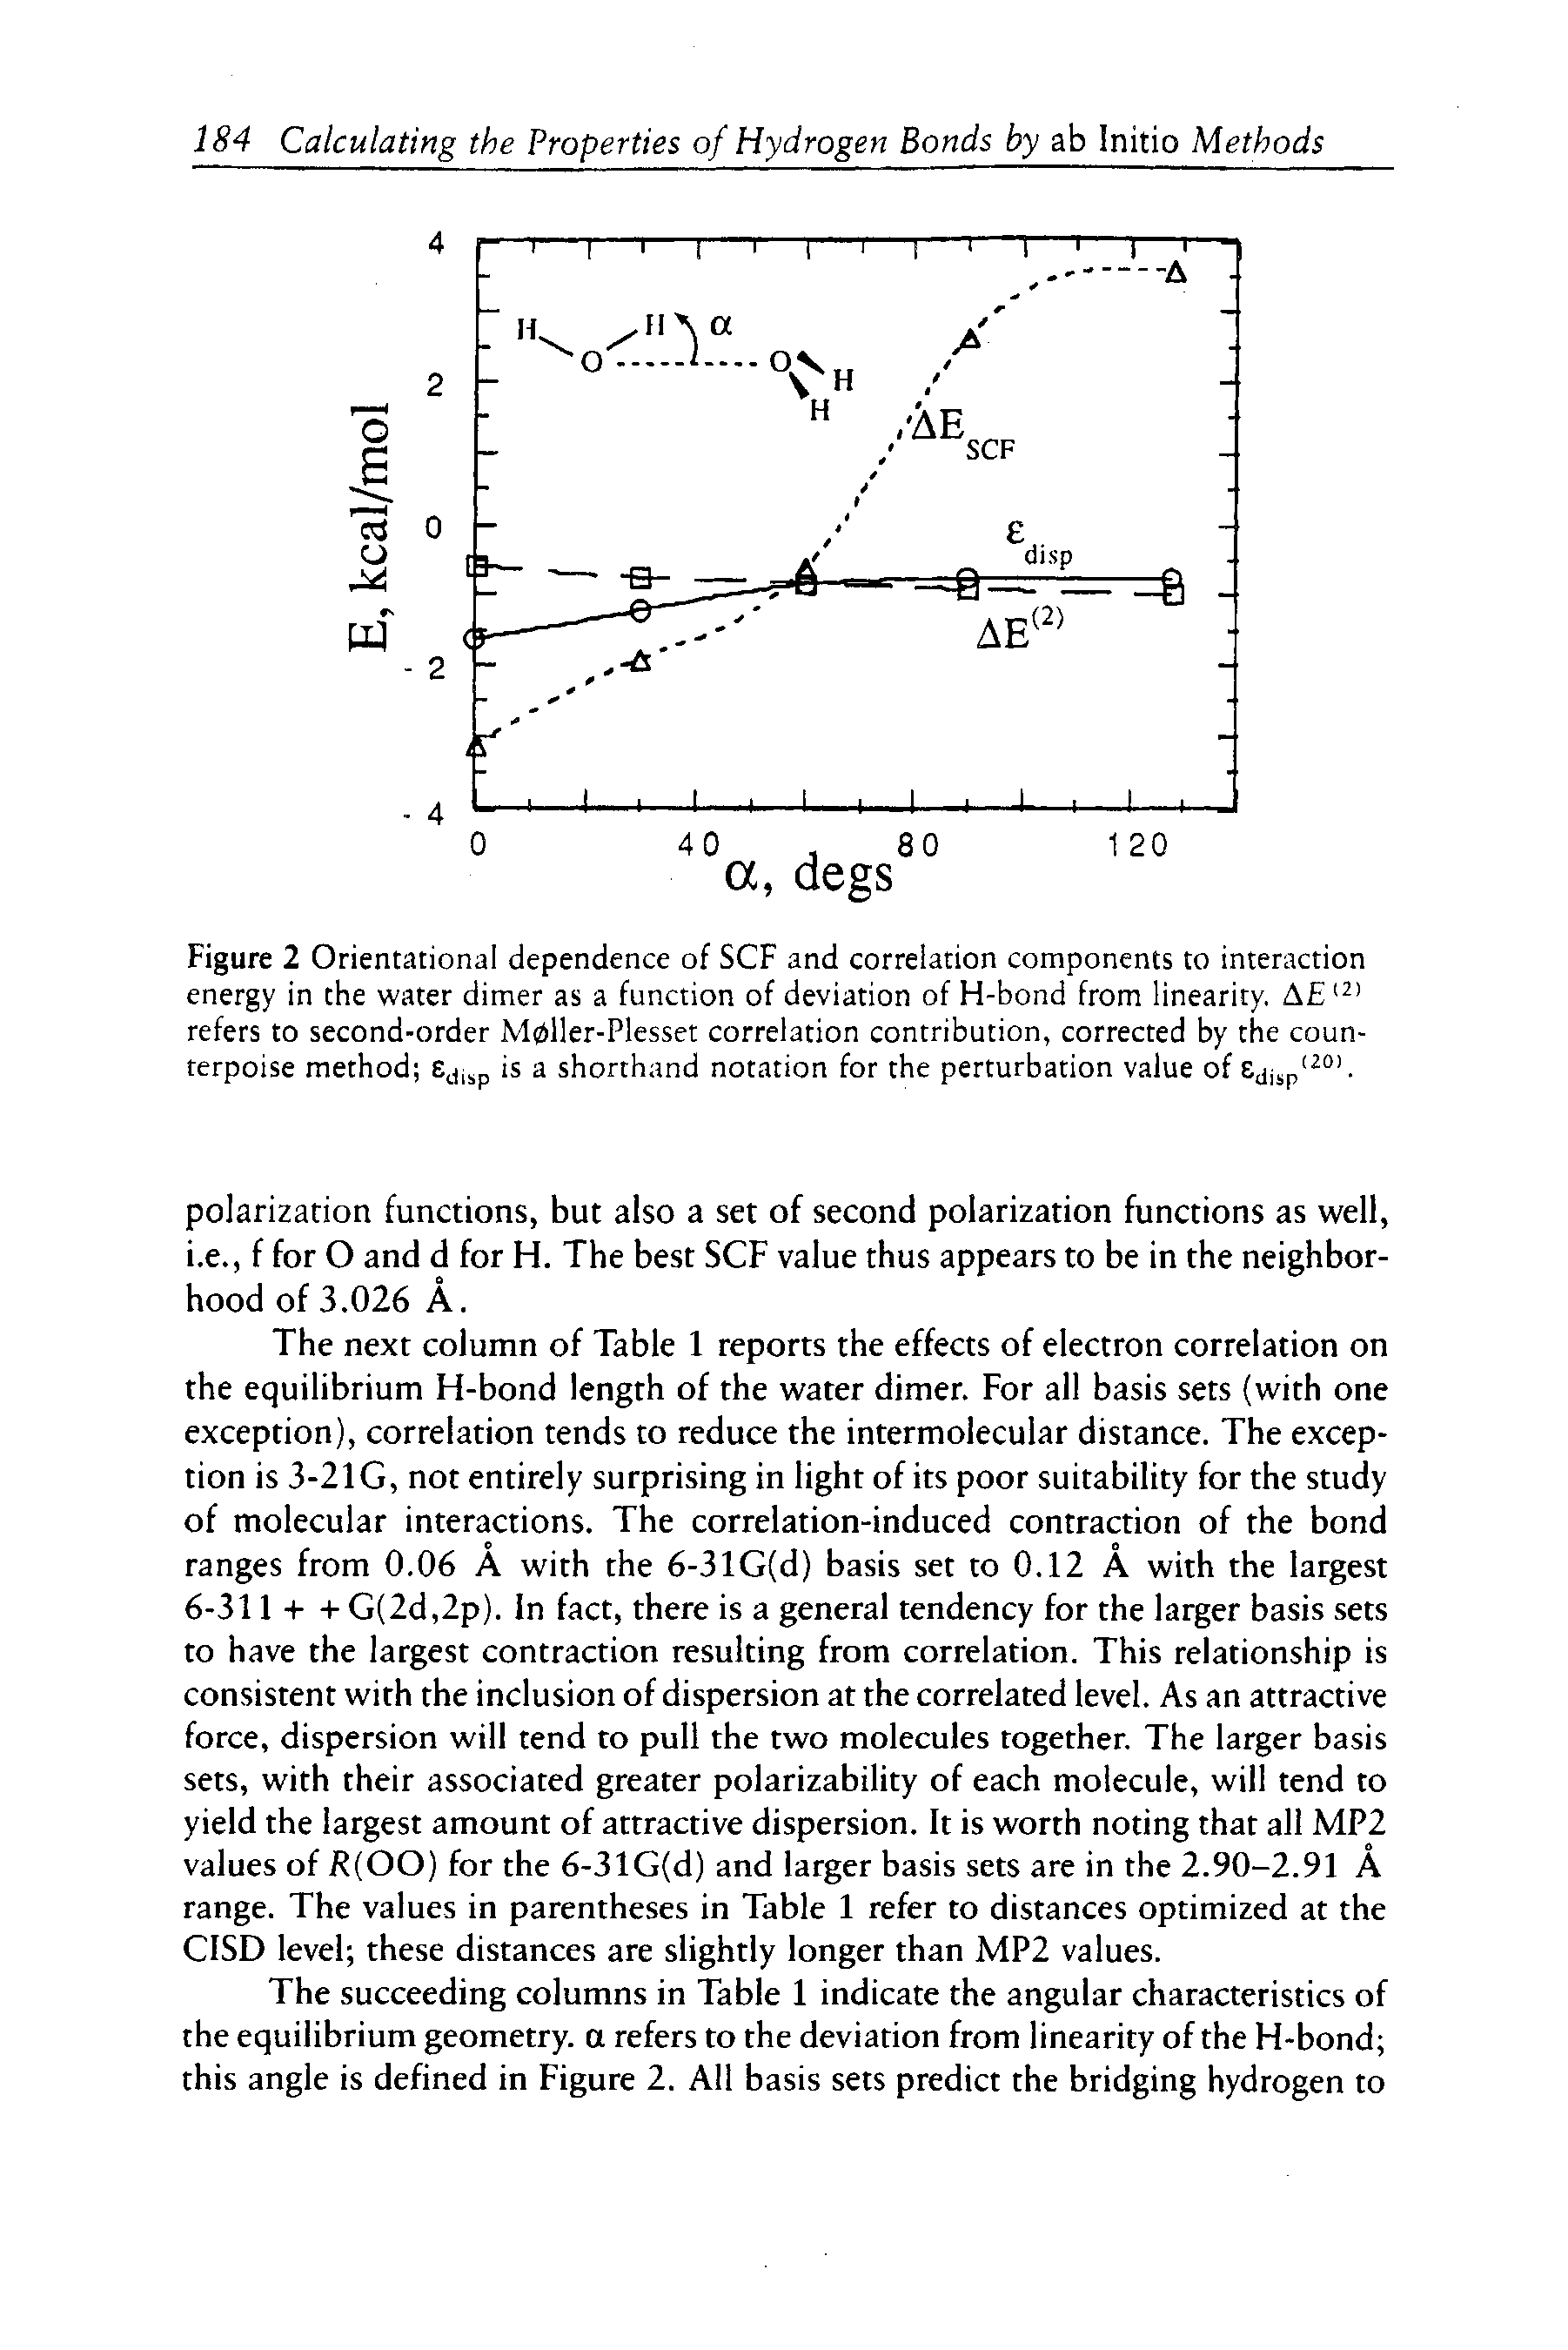 Figure 2 Orientational dependence of SCF and correlation components to interaction energy in the water dimer as a function of deviation of H-bond from linearity. A refers to second-order Mpller-Plesset correlation contribution, corrected by the counterpoise method Eji p is a shorthand notation for the perturbation value of Edisp -...